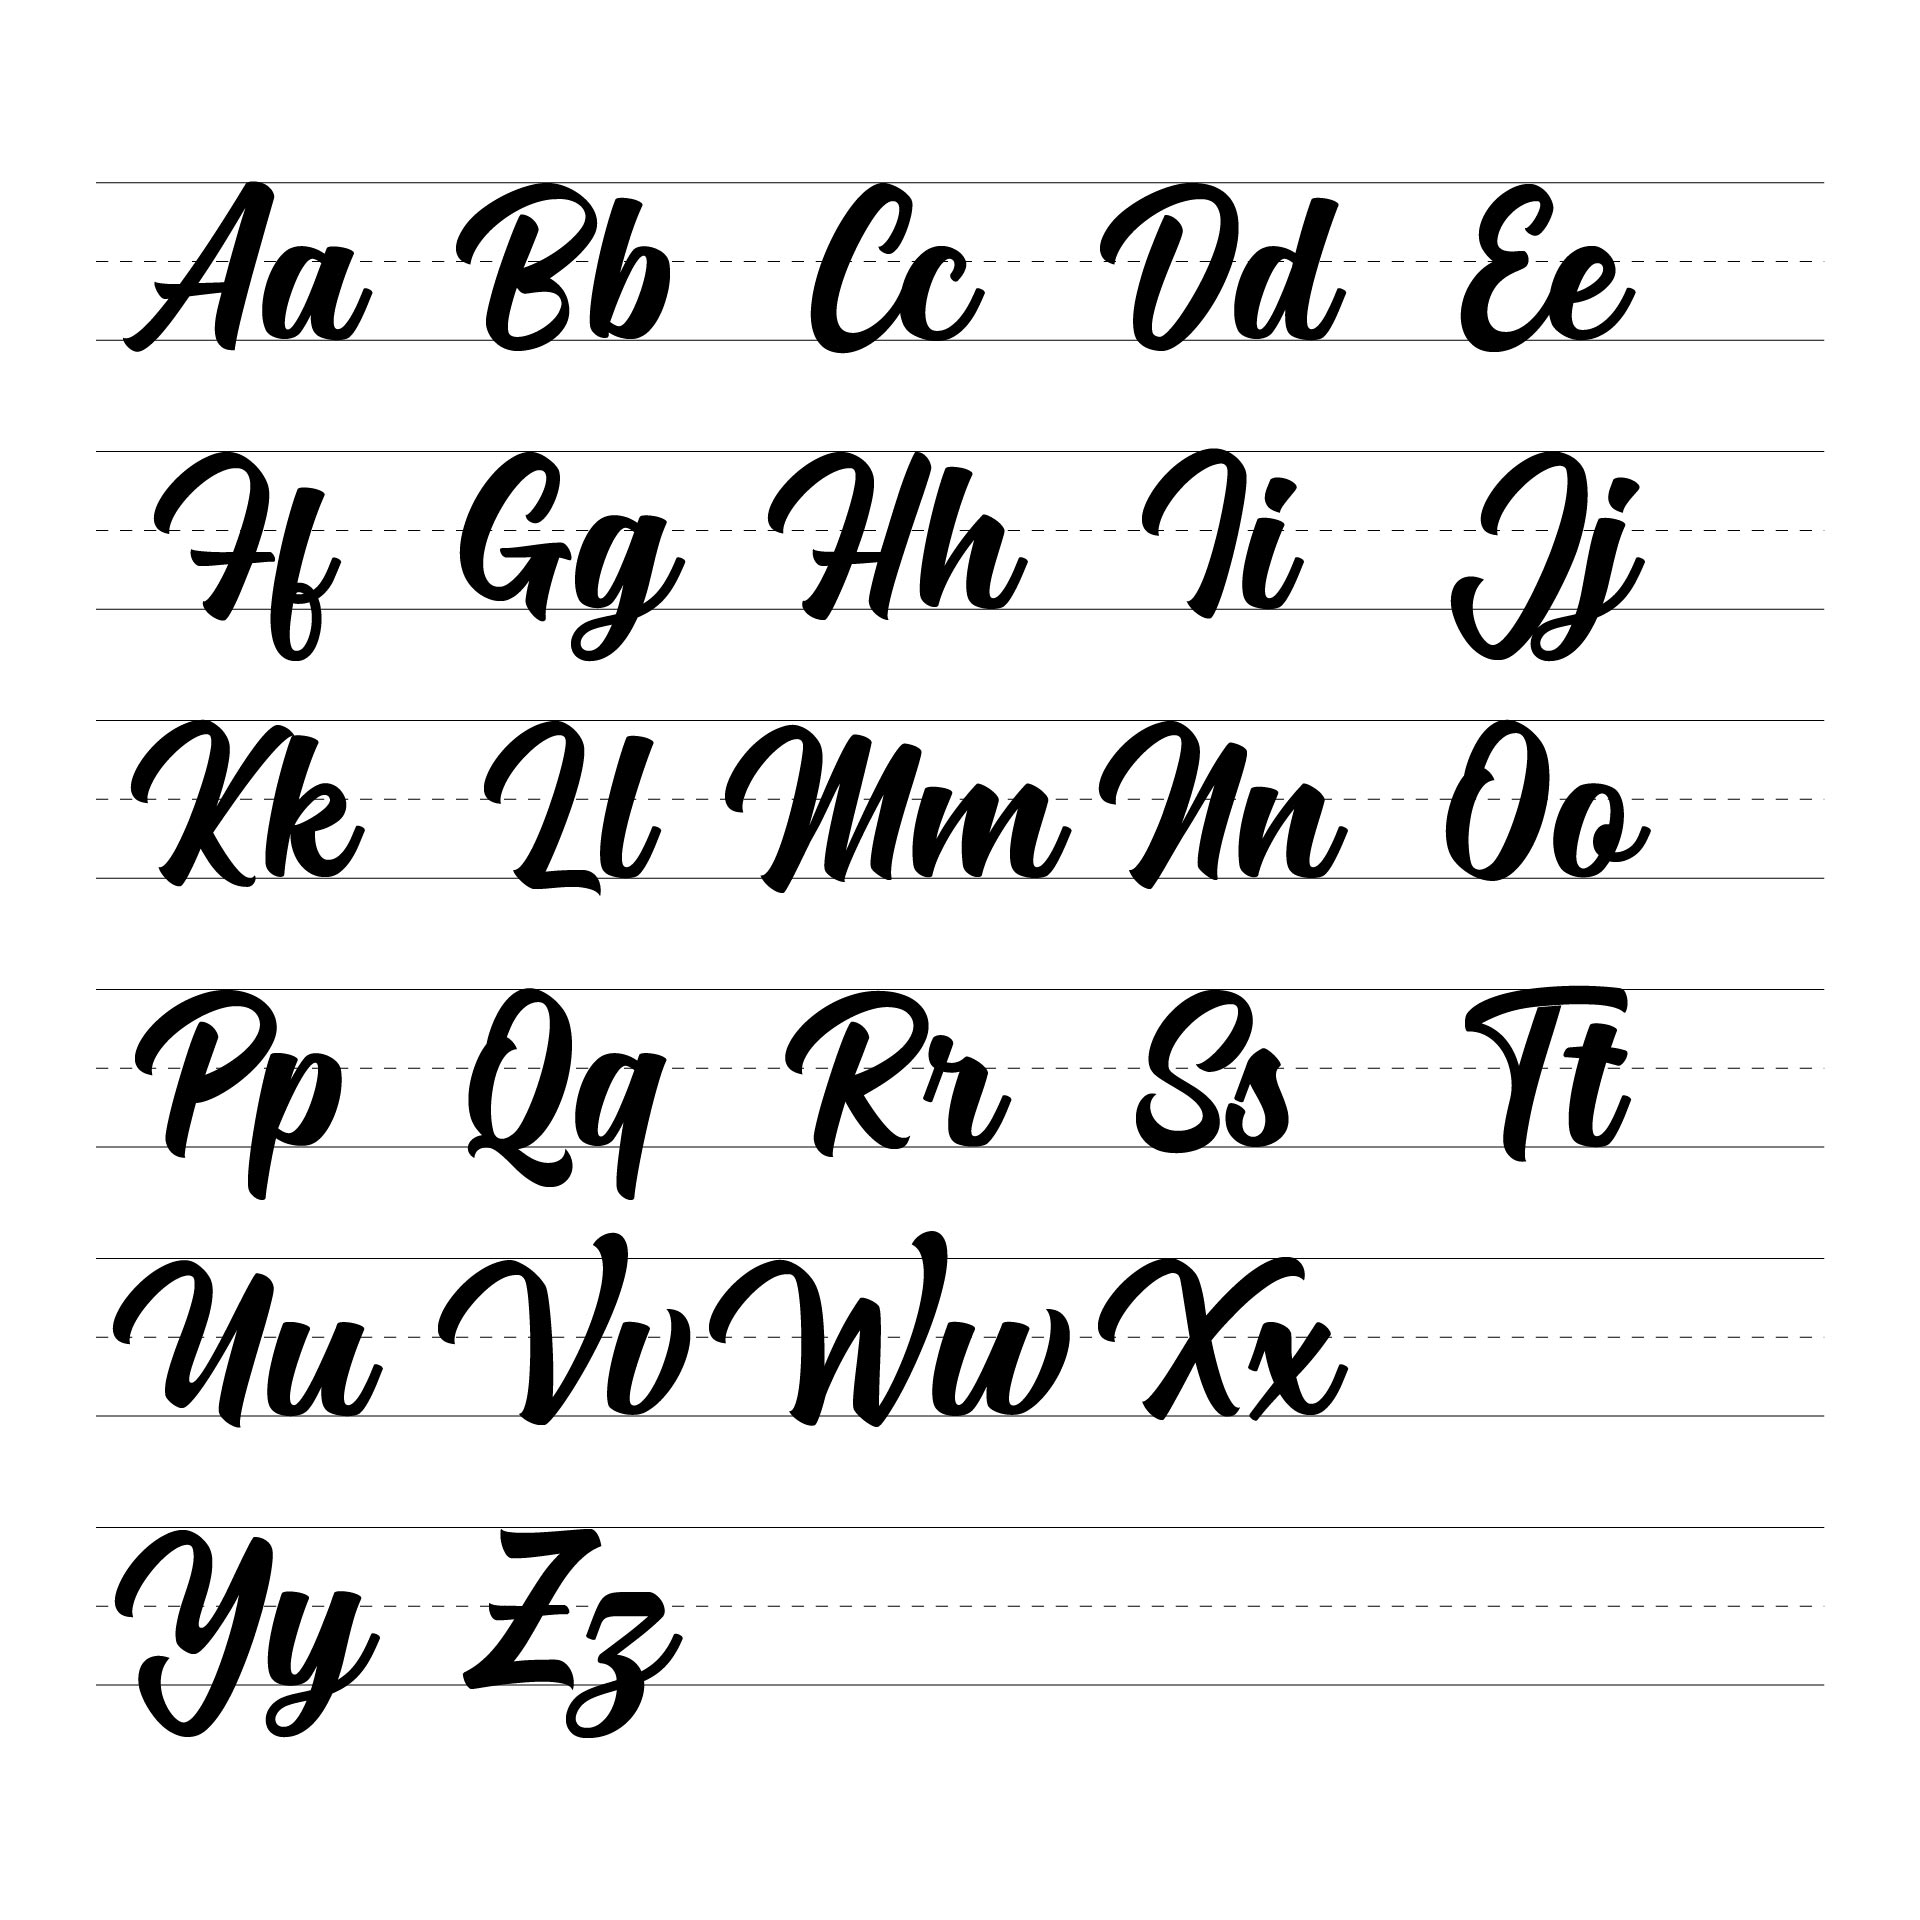 5 Best Images of Cursive Lower Case Letters Printables - Free Printable ...